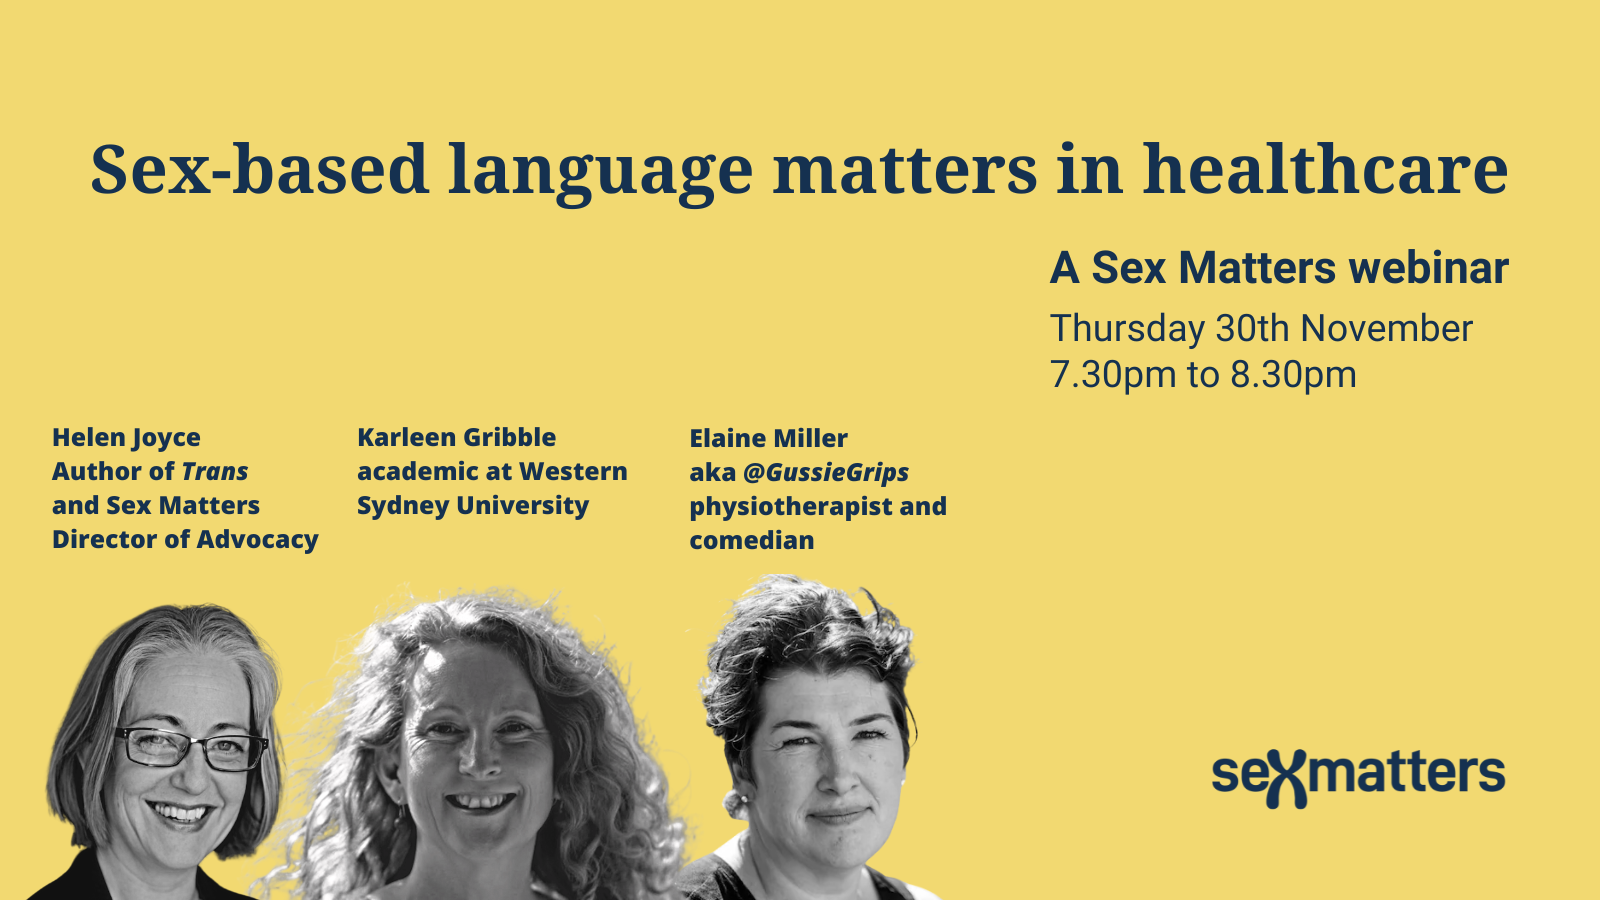 Sex-based language matters in healthcare